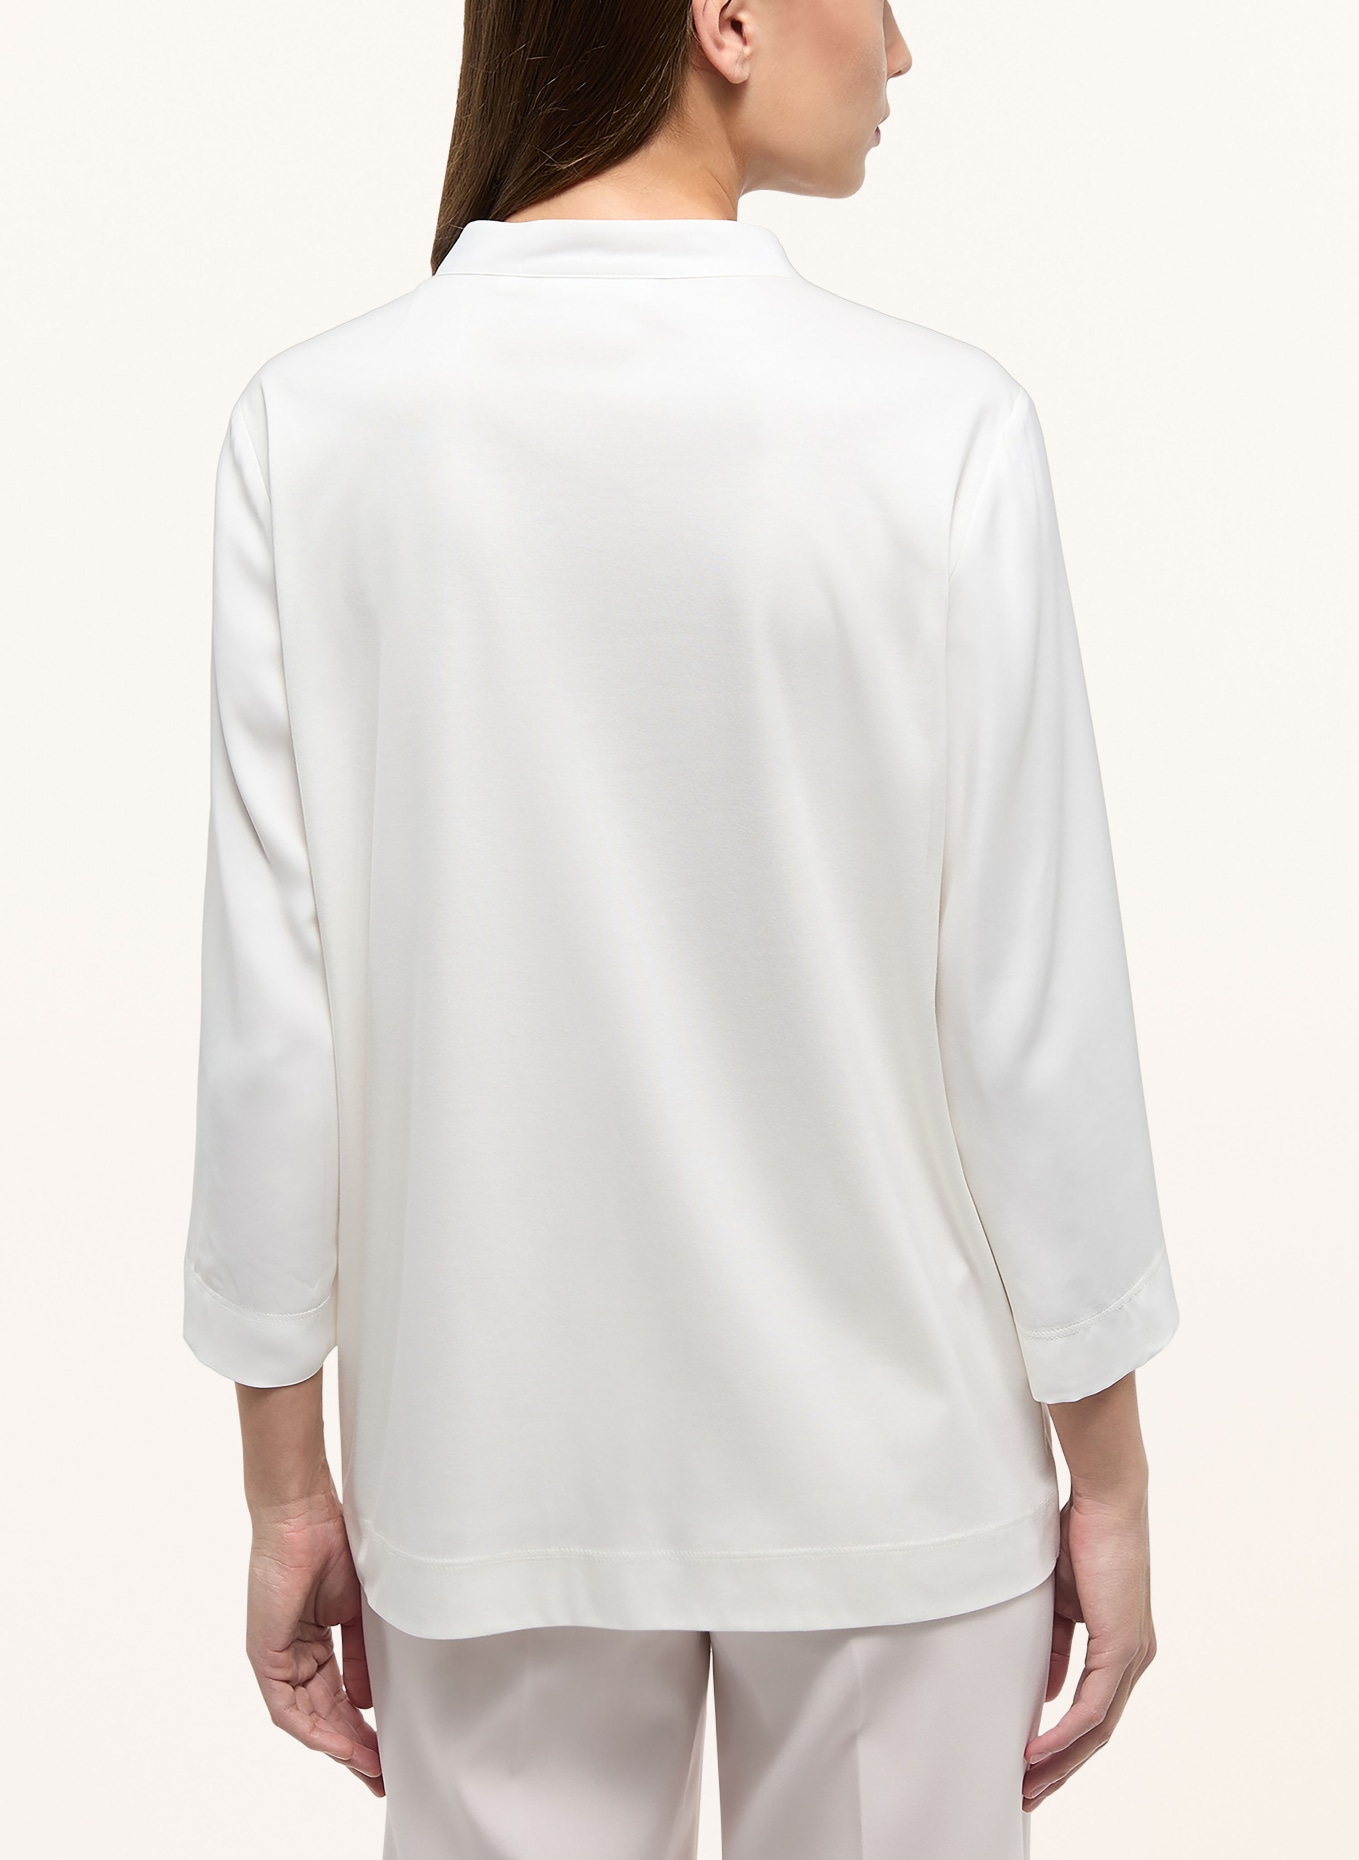 ETERNA Shirt blouse with 3/4 sleeves, Color: WHITE (Image 3)